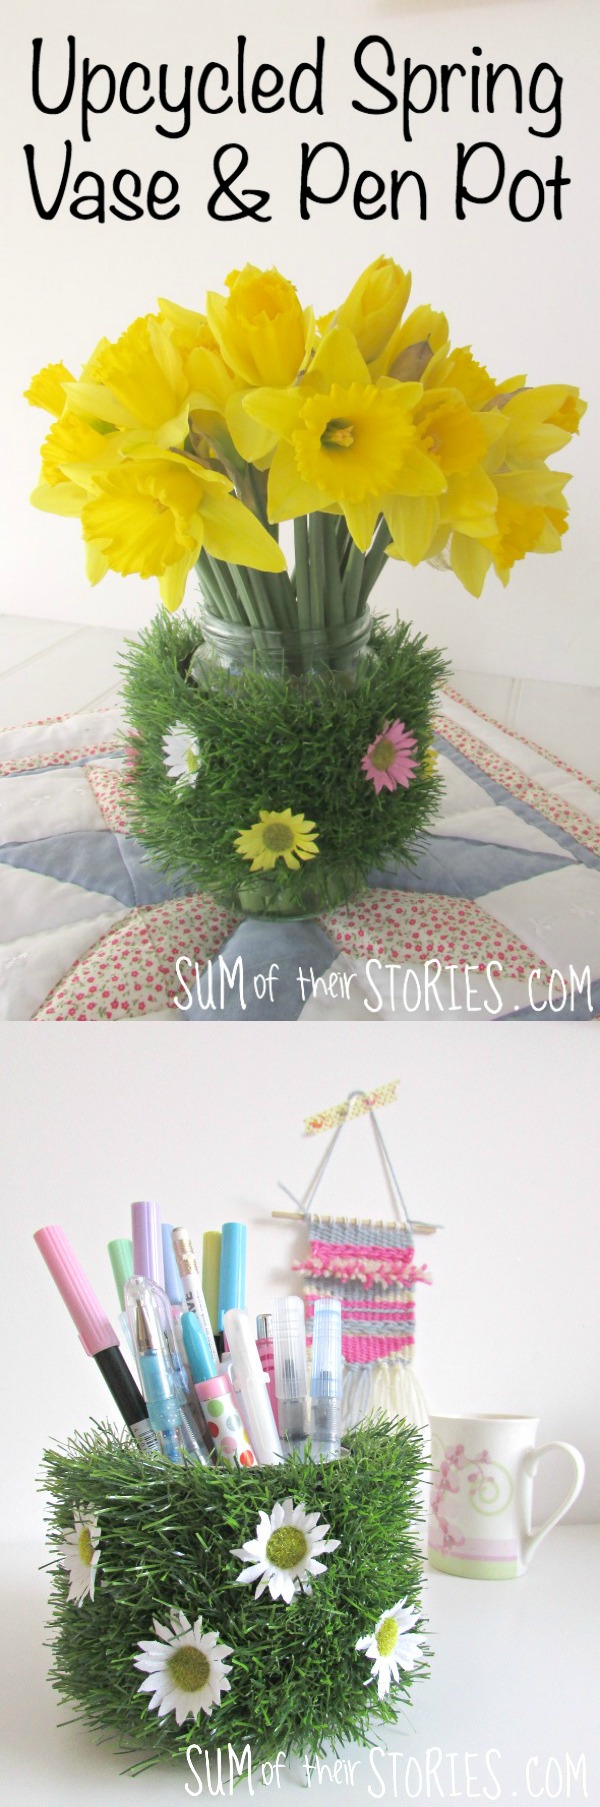 Upcycled Spring Vase and Pen pot